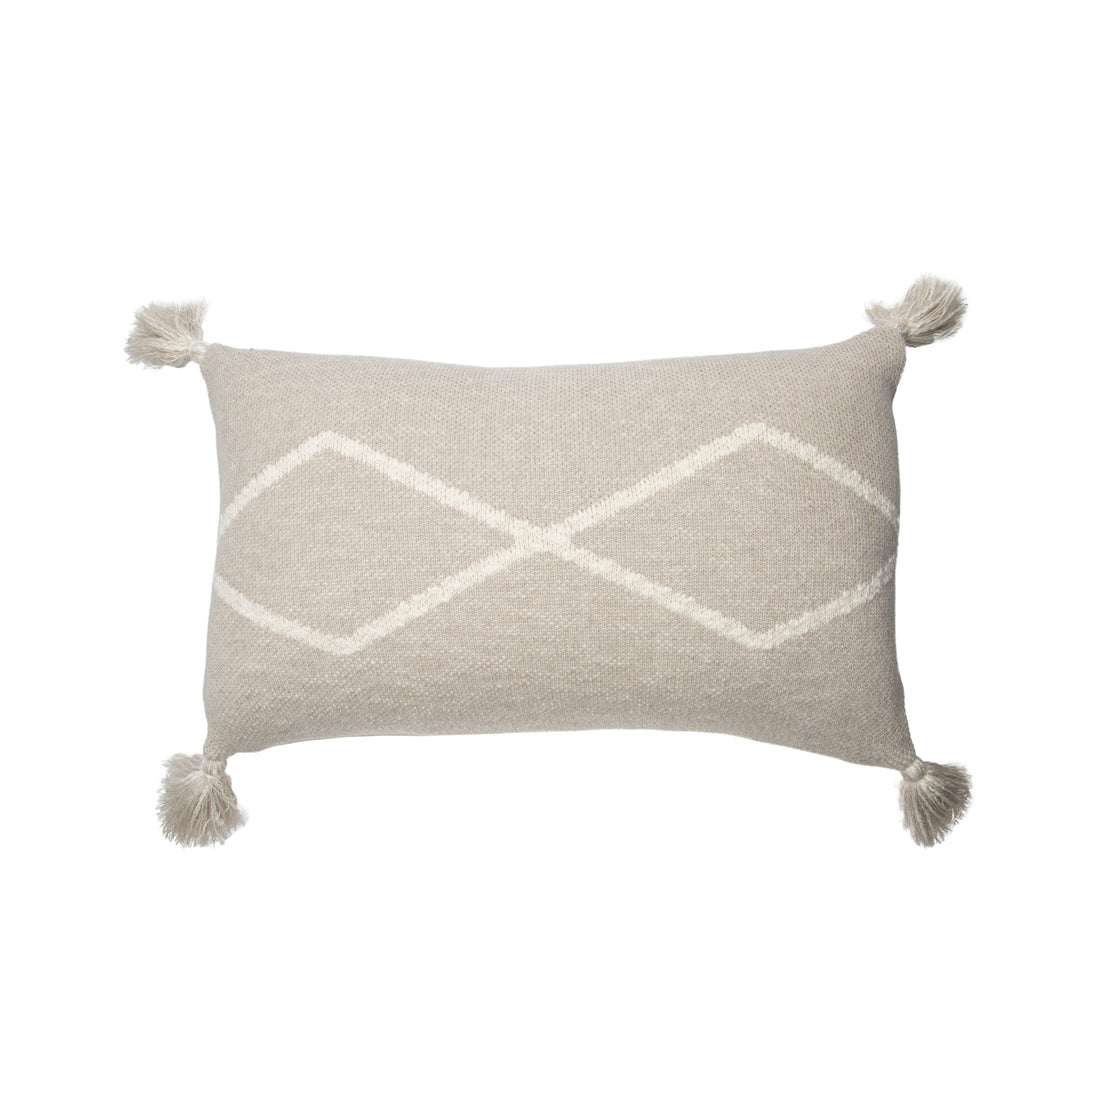 lorena-canals-oasis-soft-linen-machine-washable-knitted-cushion- (1)